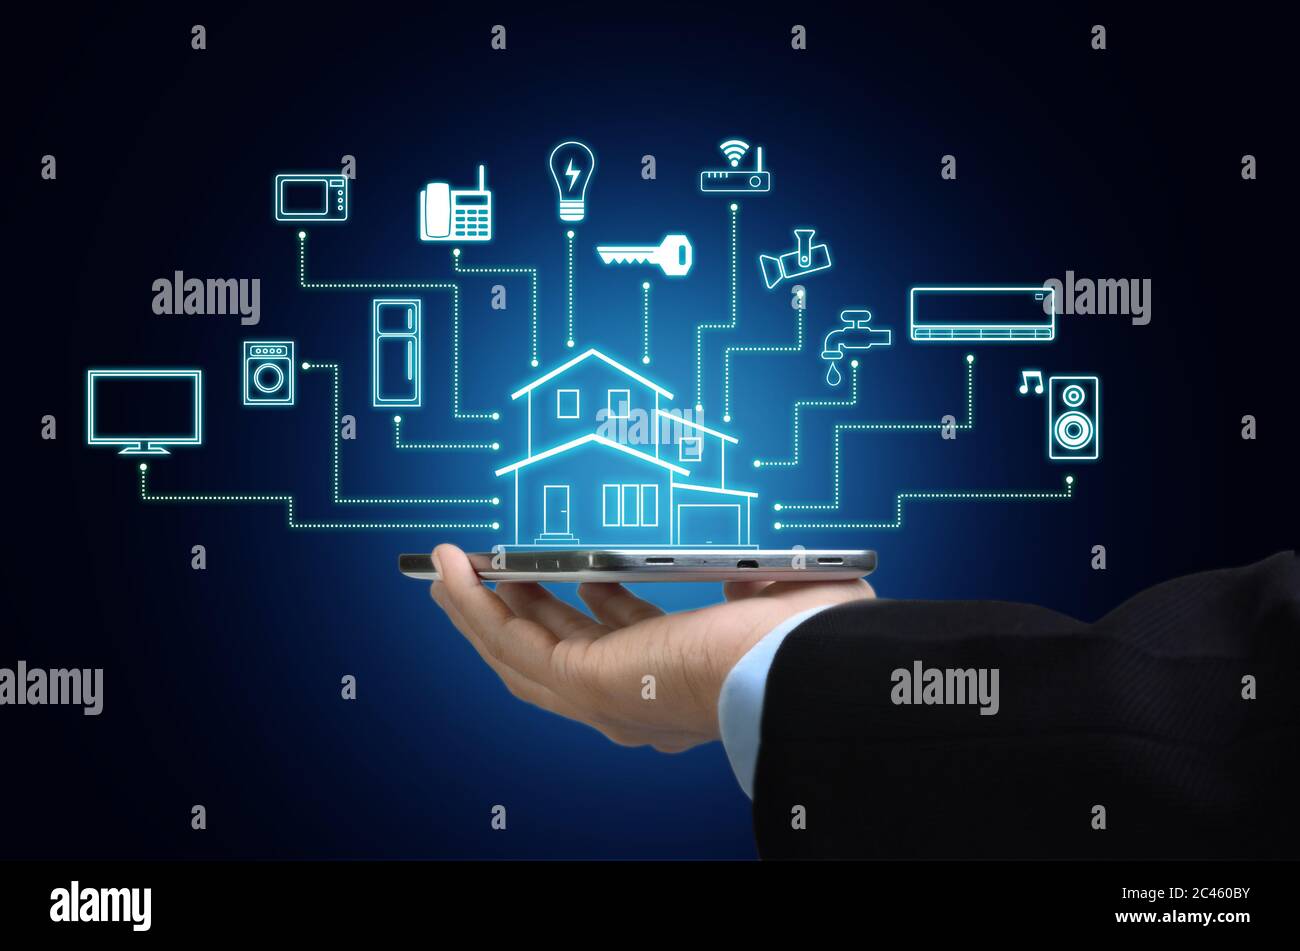 Internet of things and smart home concept Stock Photo